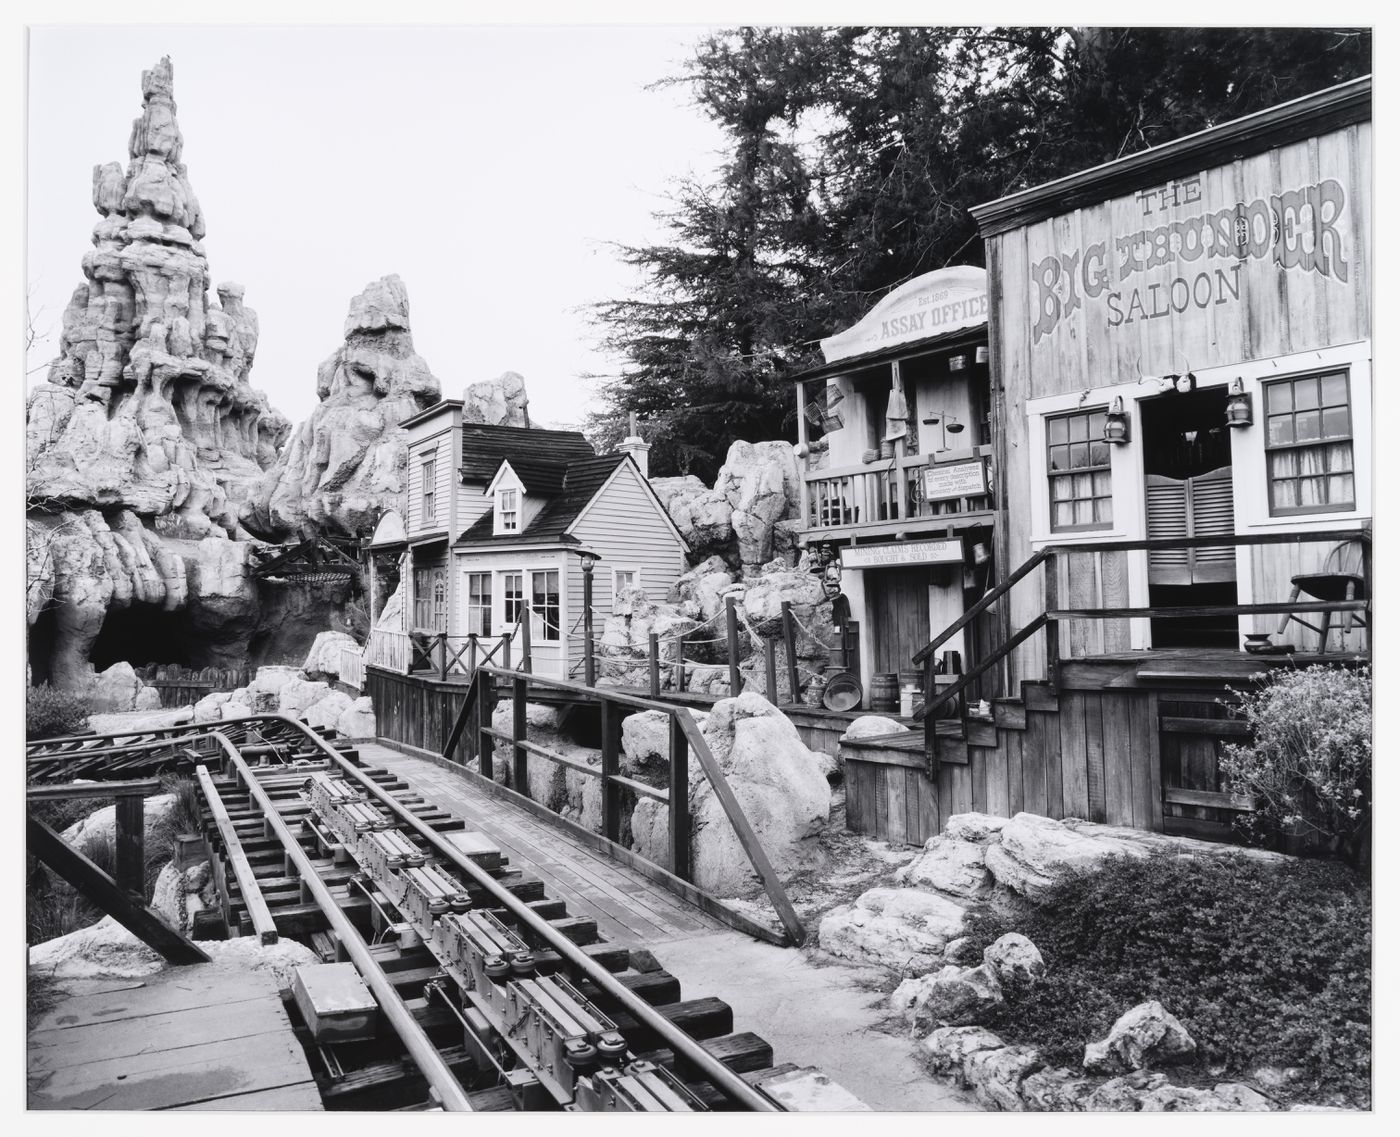 View of Westernland showing saloon, railroad and Big Thunder Mountain in the background, Disneyland, Tokyo, Japan